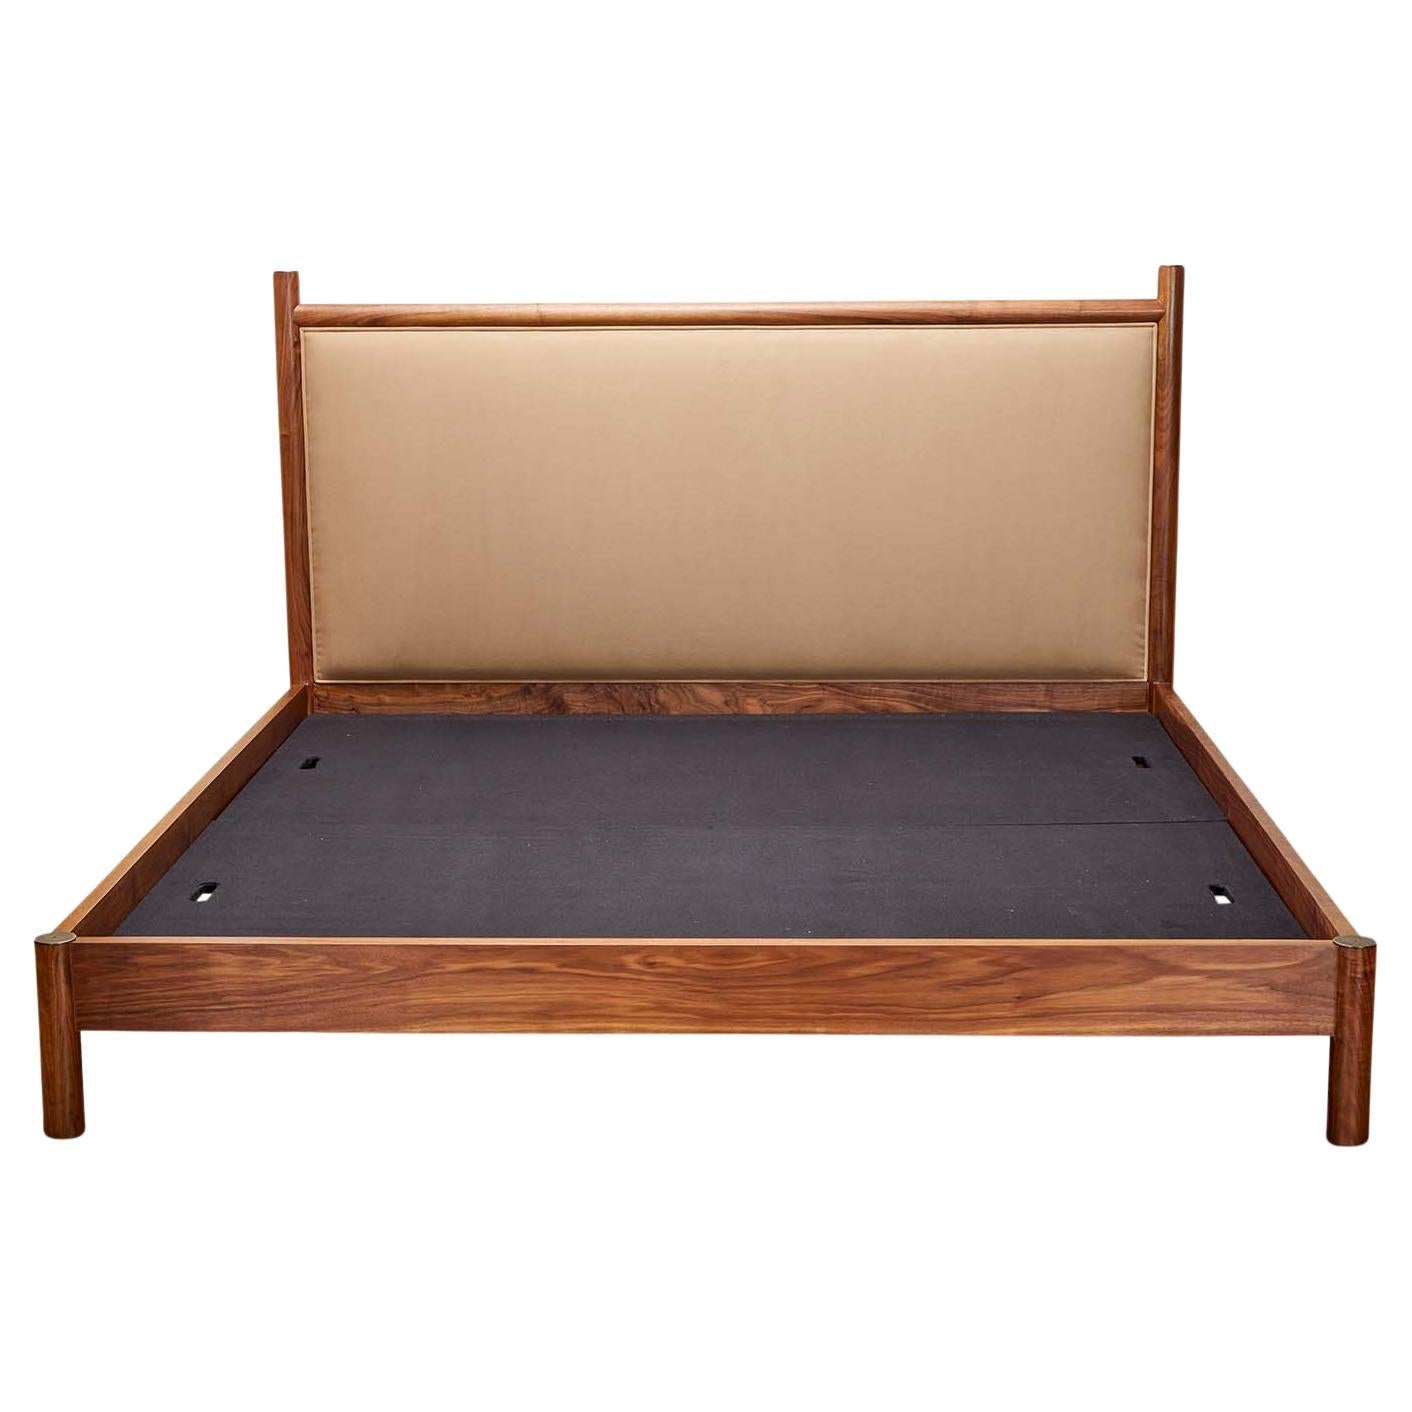 Chiselhurst Bed No Footboard by Lawson-Fenning, King For Sale